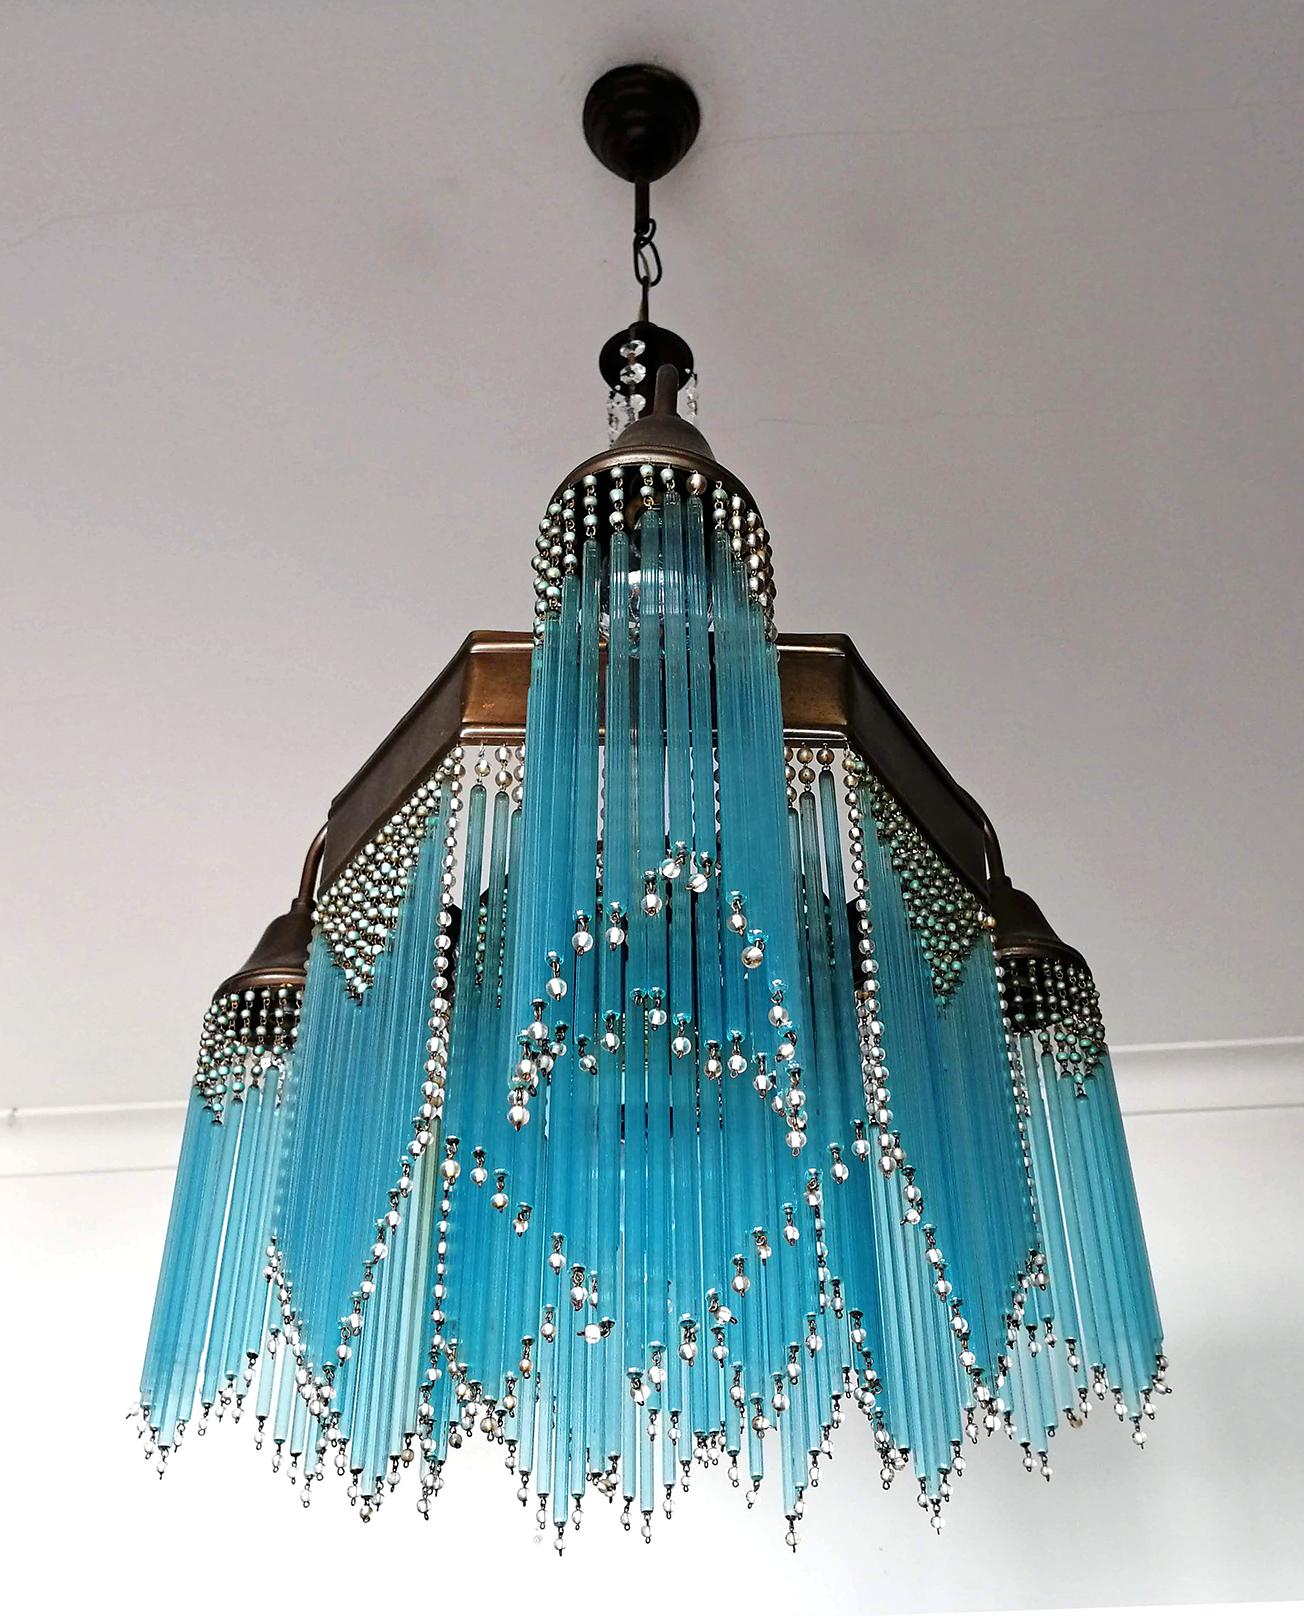 20th Century French Art Deco and Art Nouveau Blue Straw Fringe and Beaded Glass Chandelier